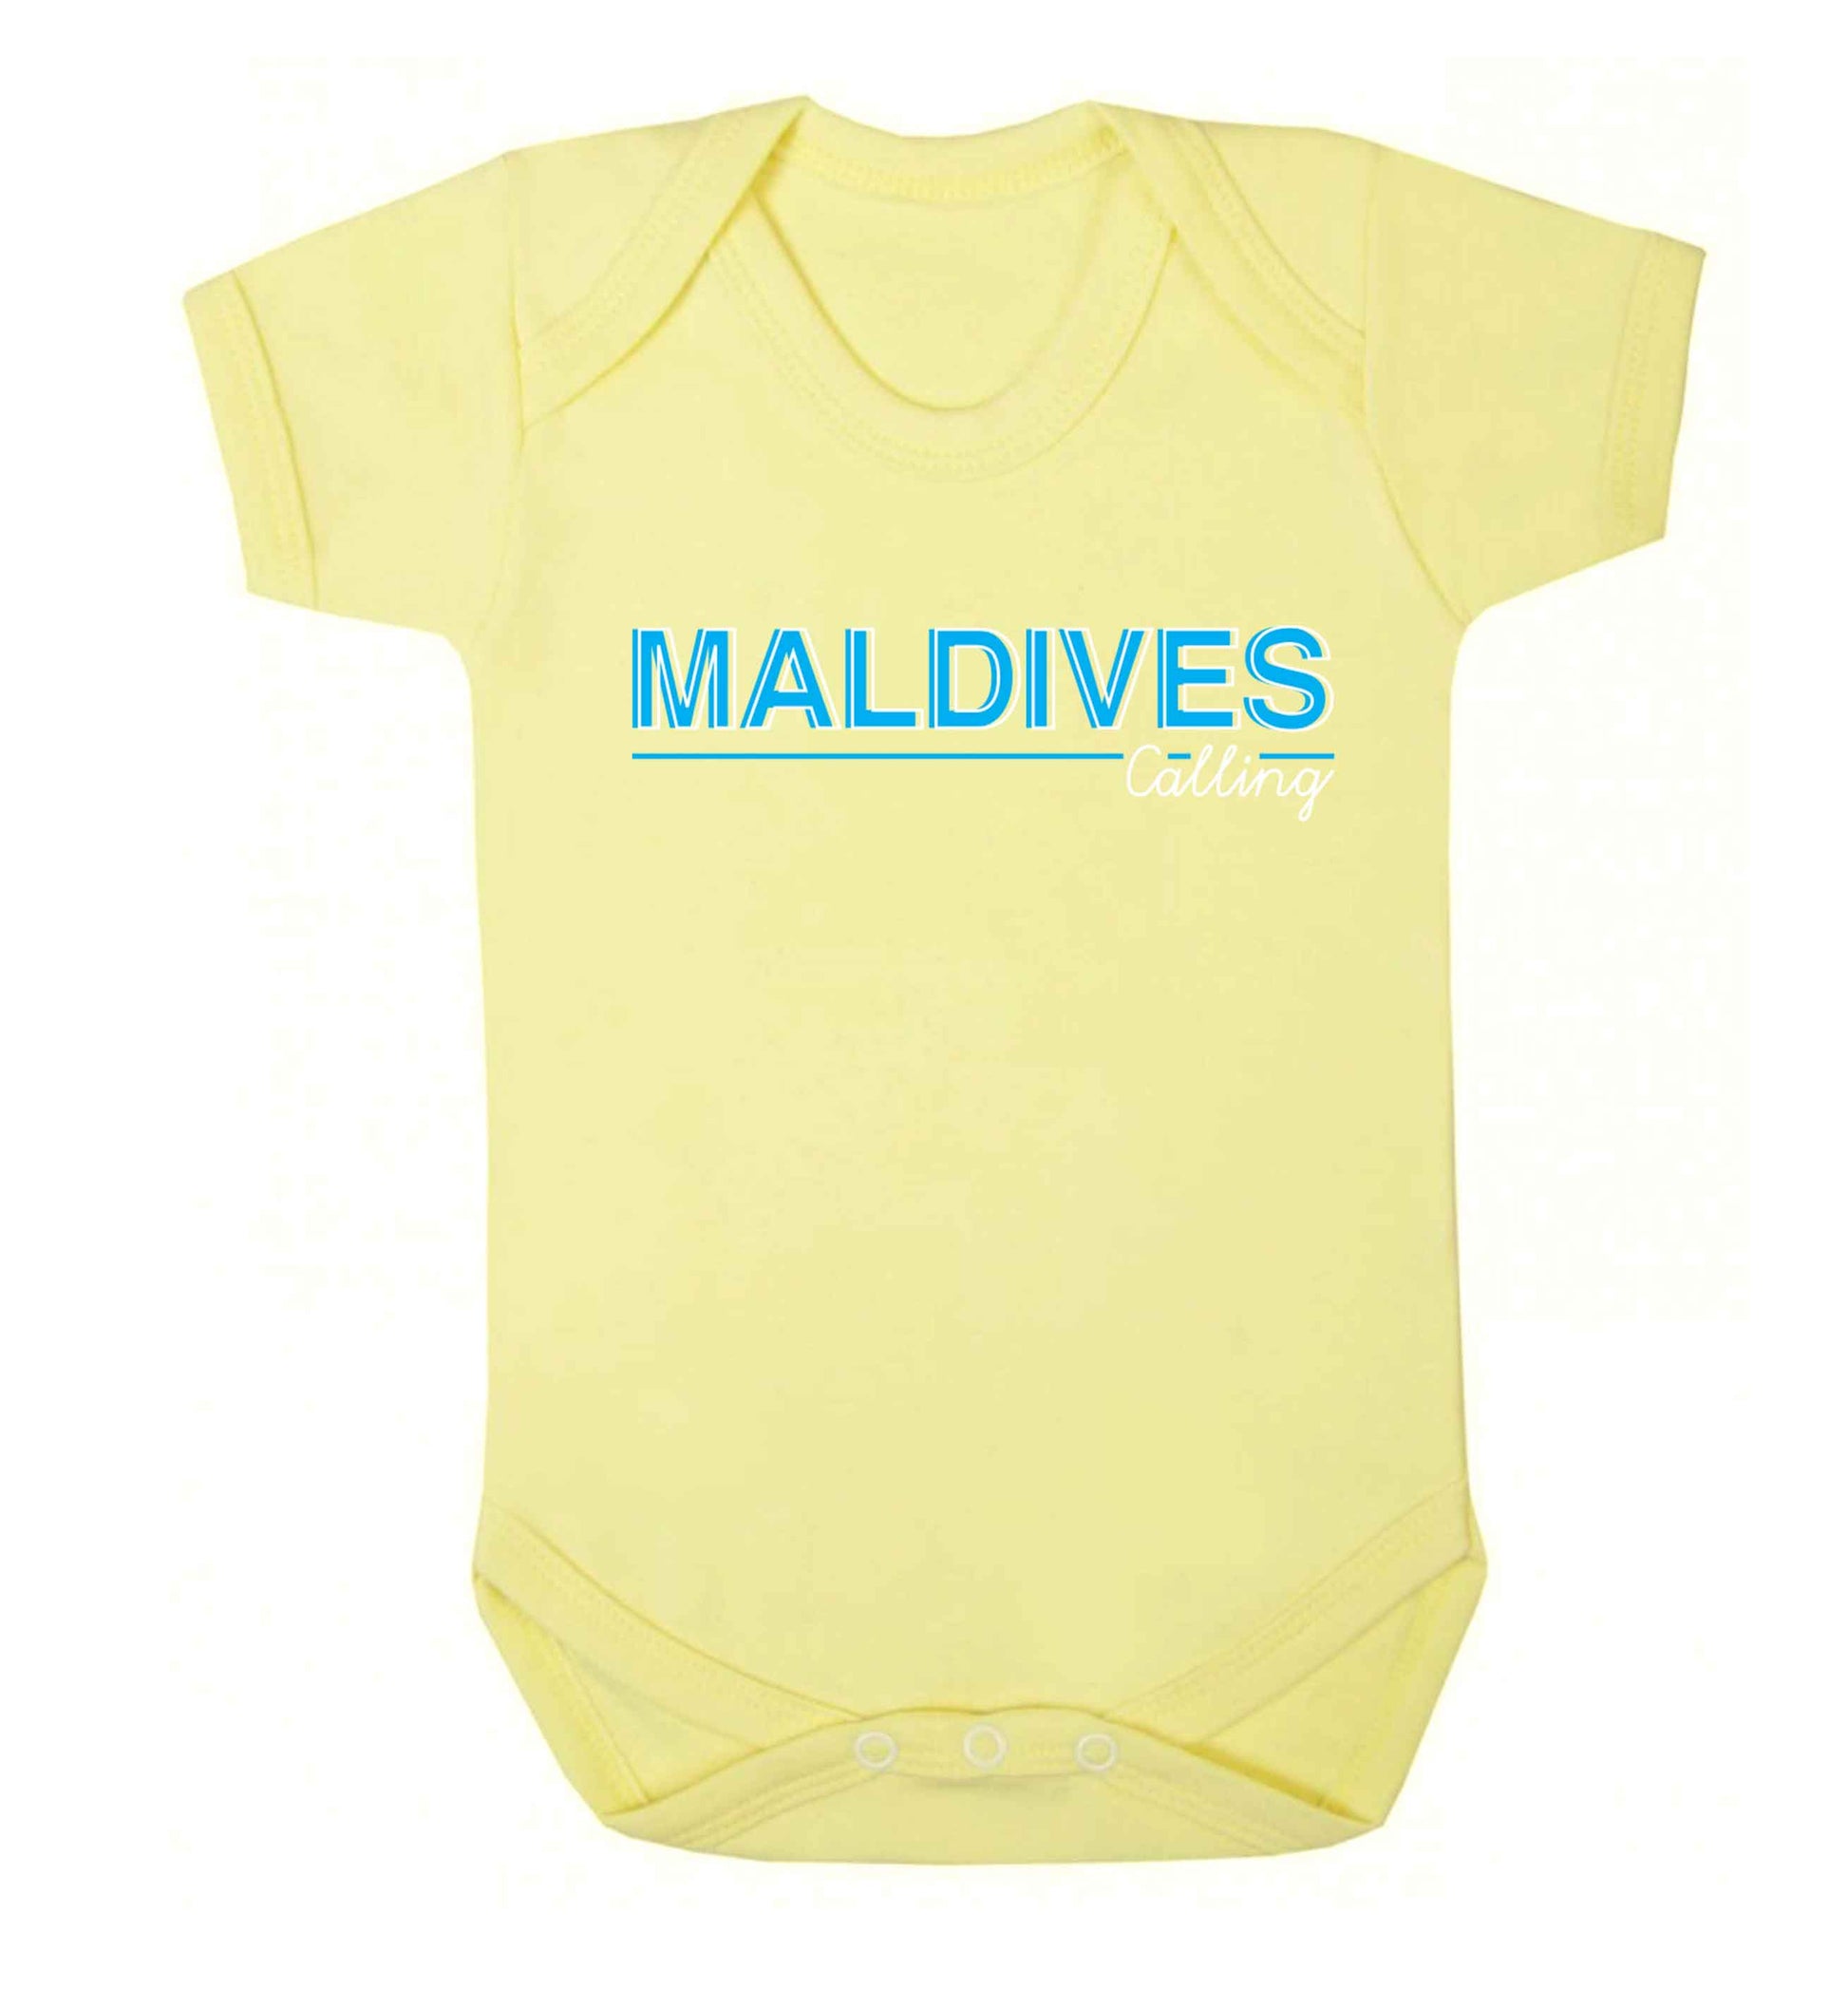 Maldives calling Baby Vest pale yellow 18-24 months